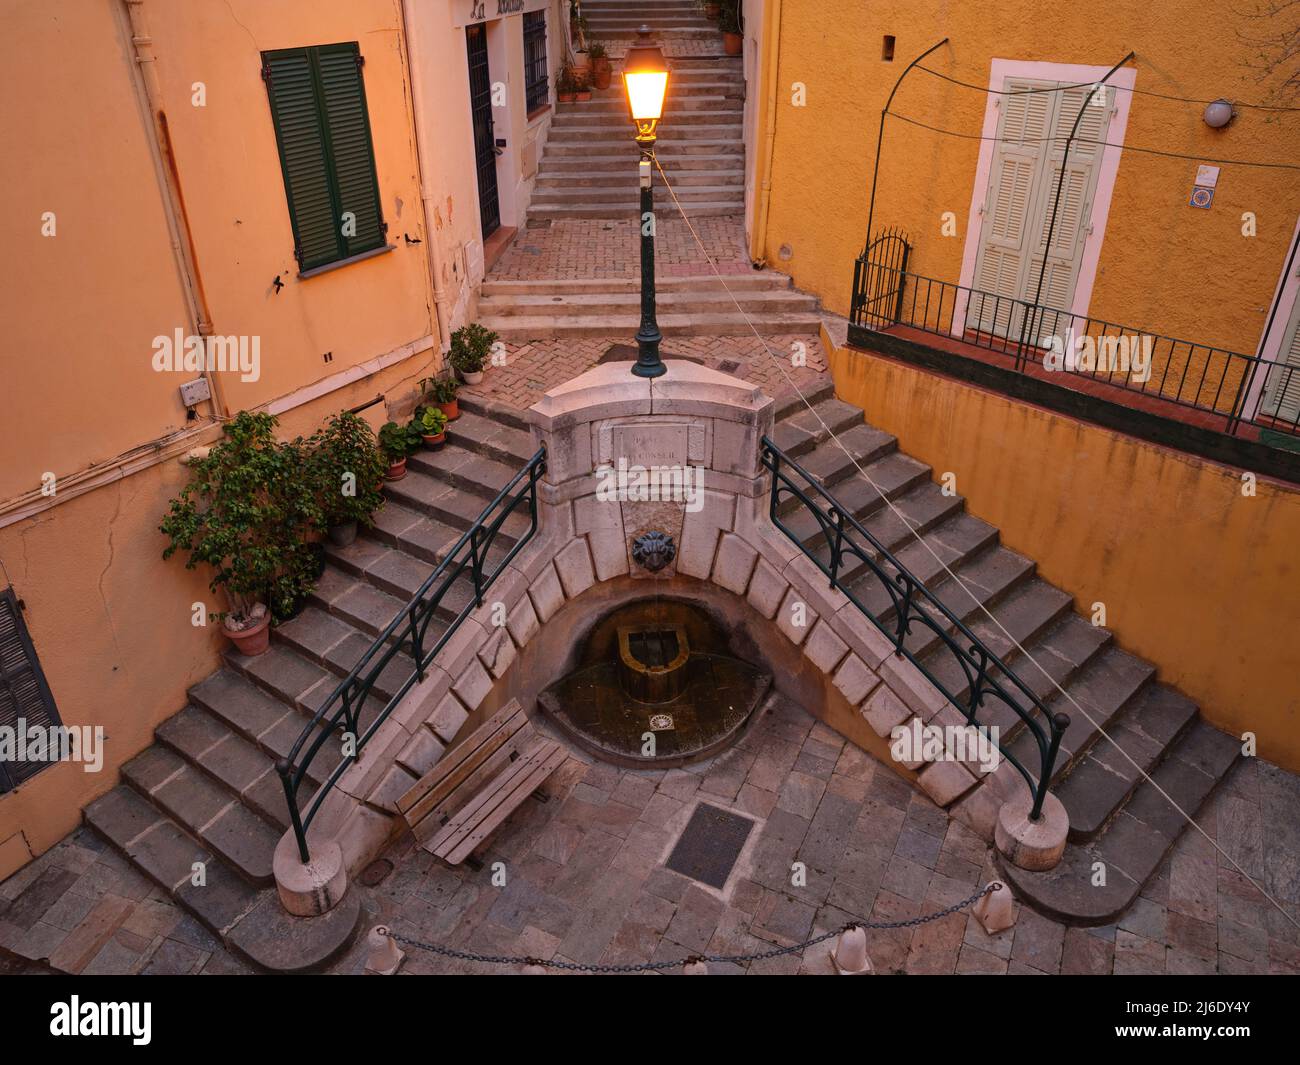 AERIAL VIEW from a 6-meter mast. Charming staircase with a small fountain in the Old Town of Villefranche-sur-Mer. French Riviera, France. Stock Photo